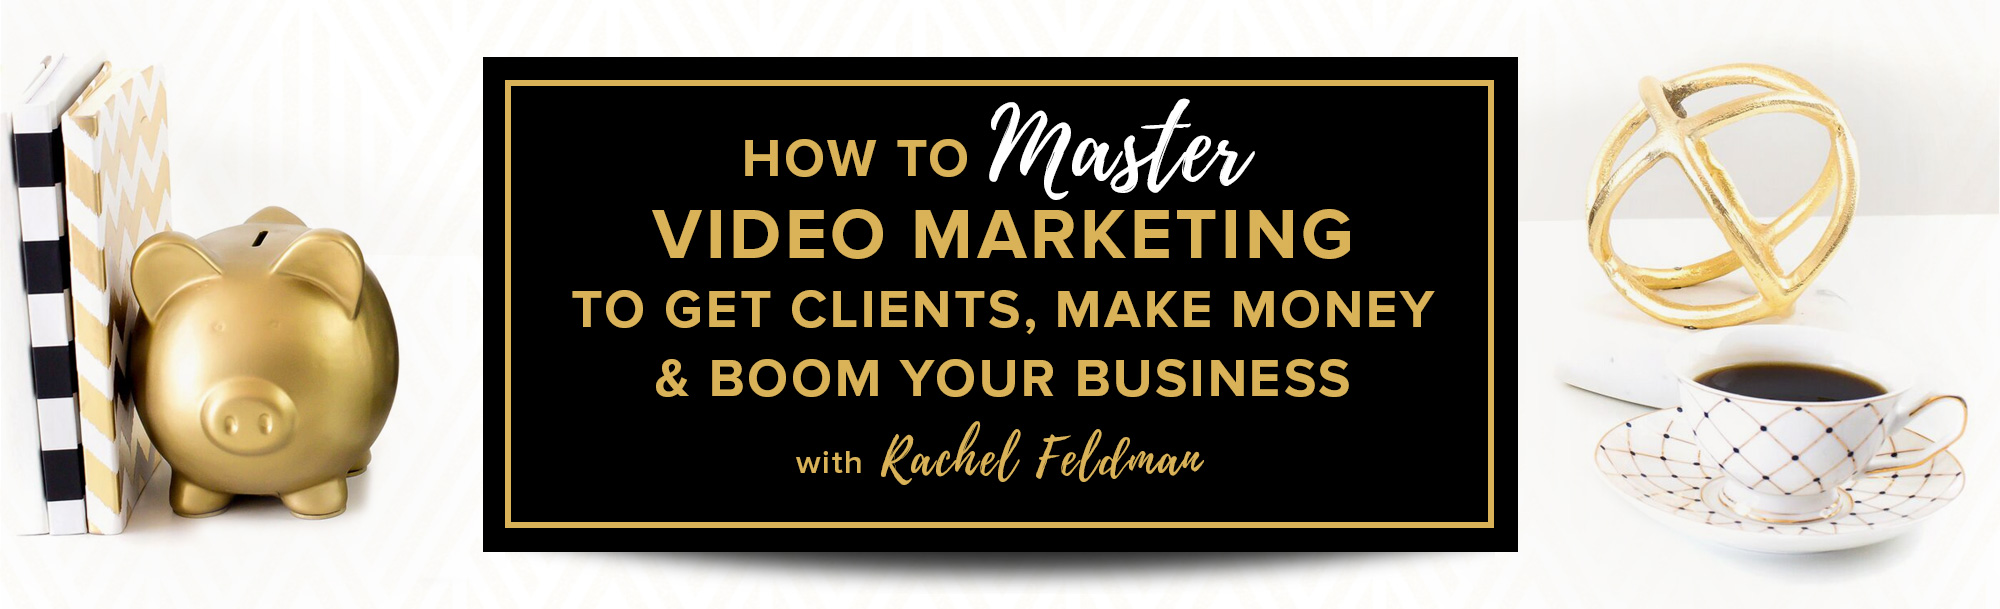 How to master video marketing to get clients, make money and boom your business